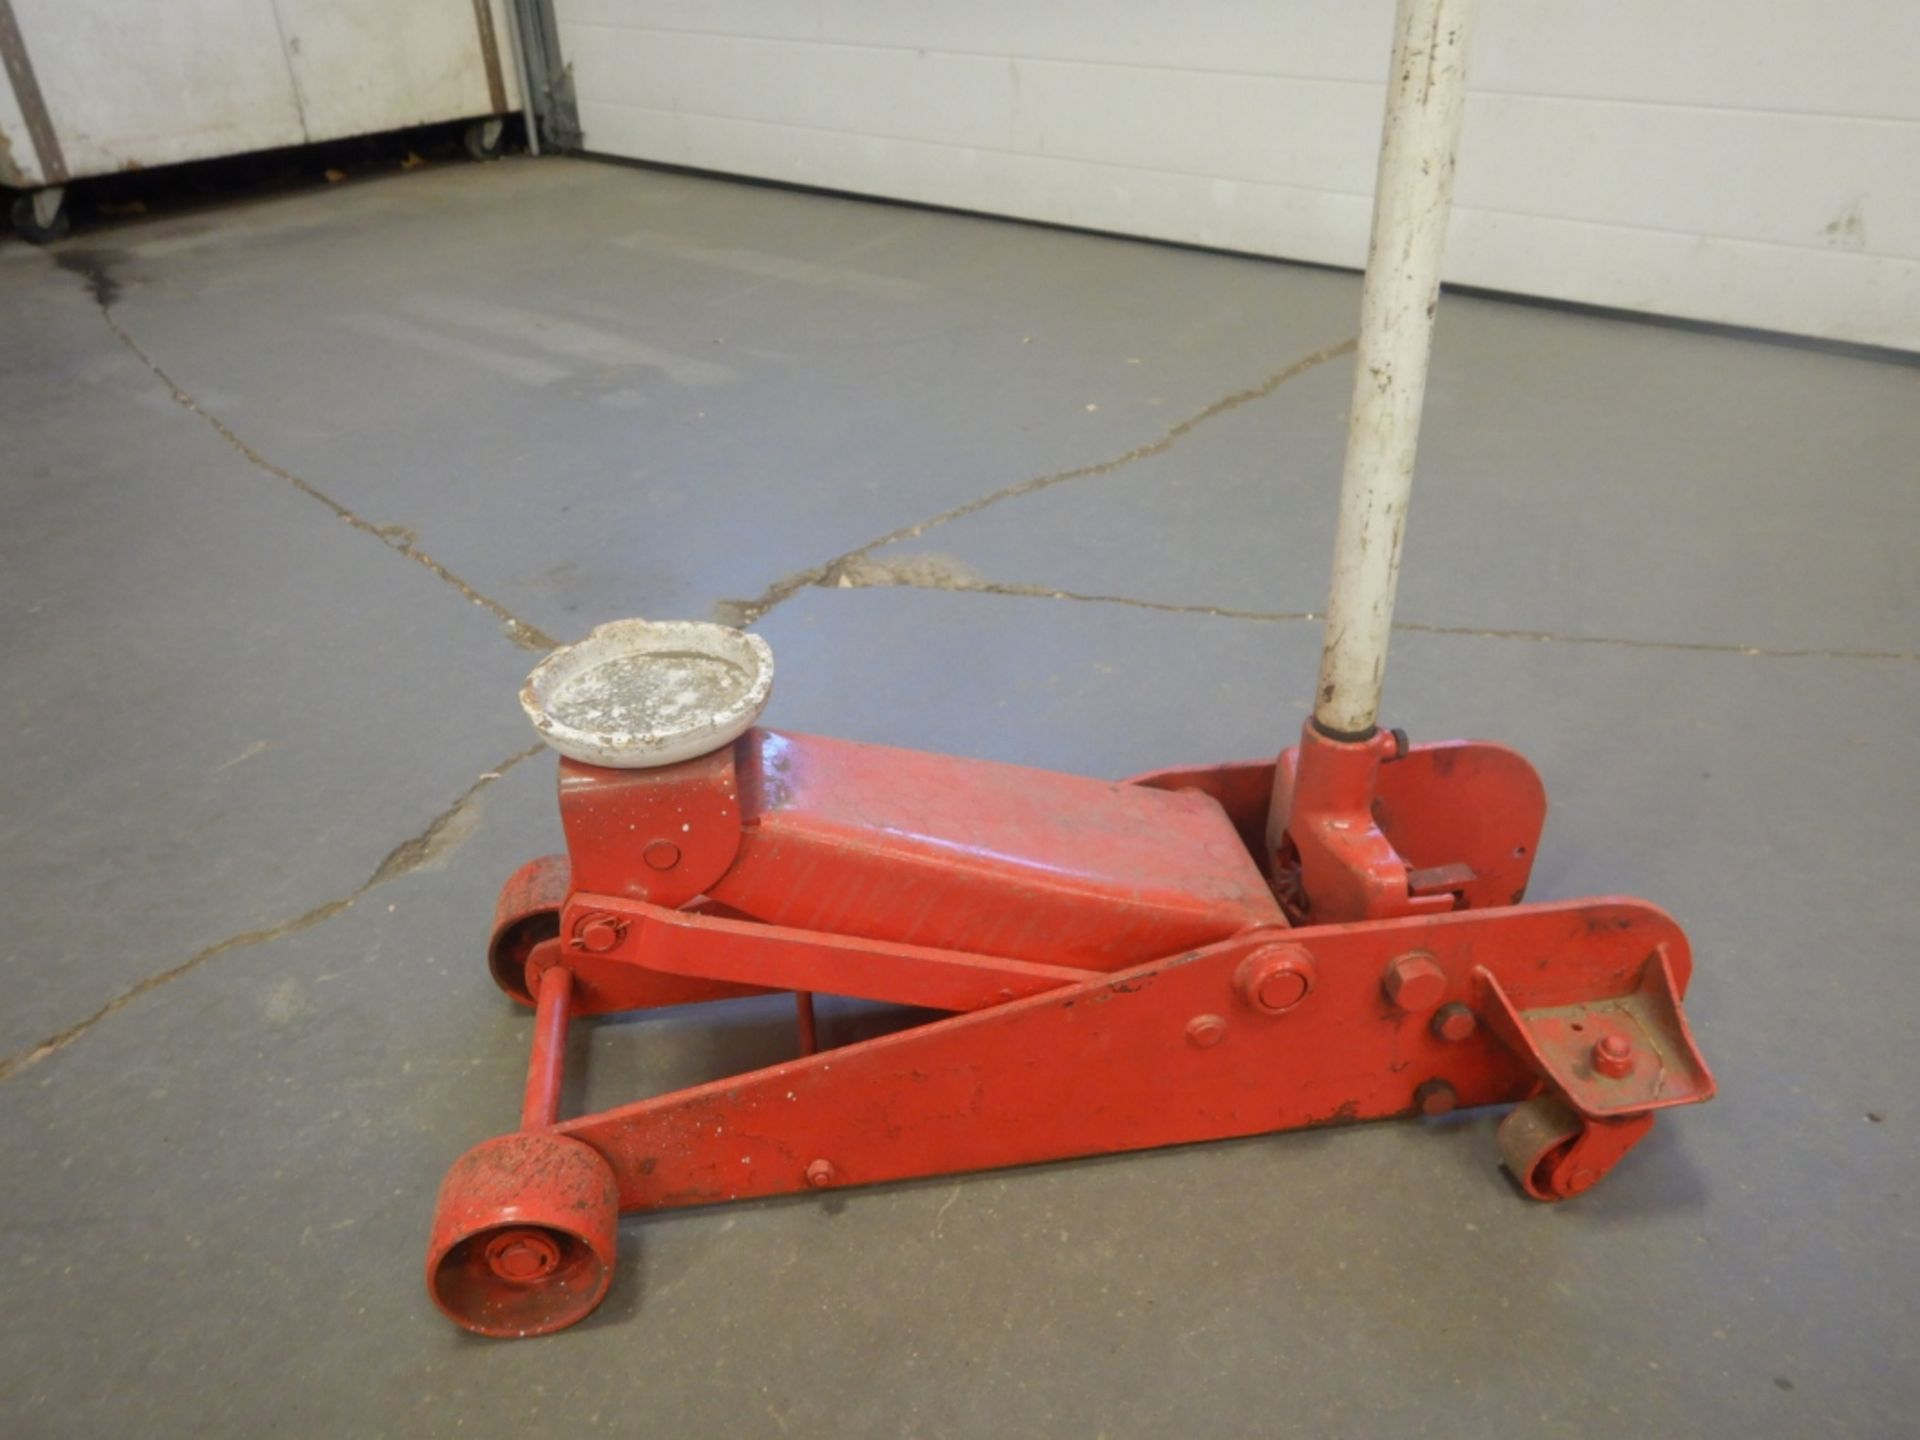 AUTOMOTIVE HYD. FLOOR JACK PAINTED RED AND WHITE - Image 2 of 3